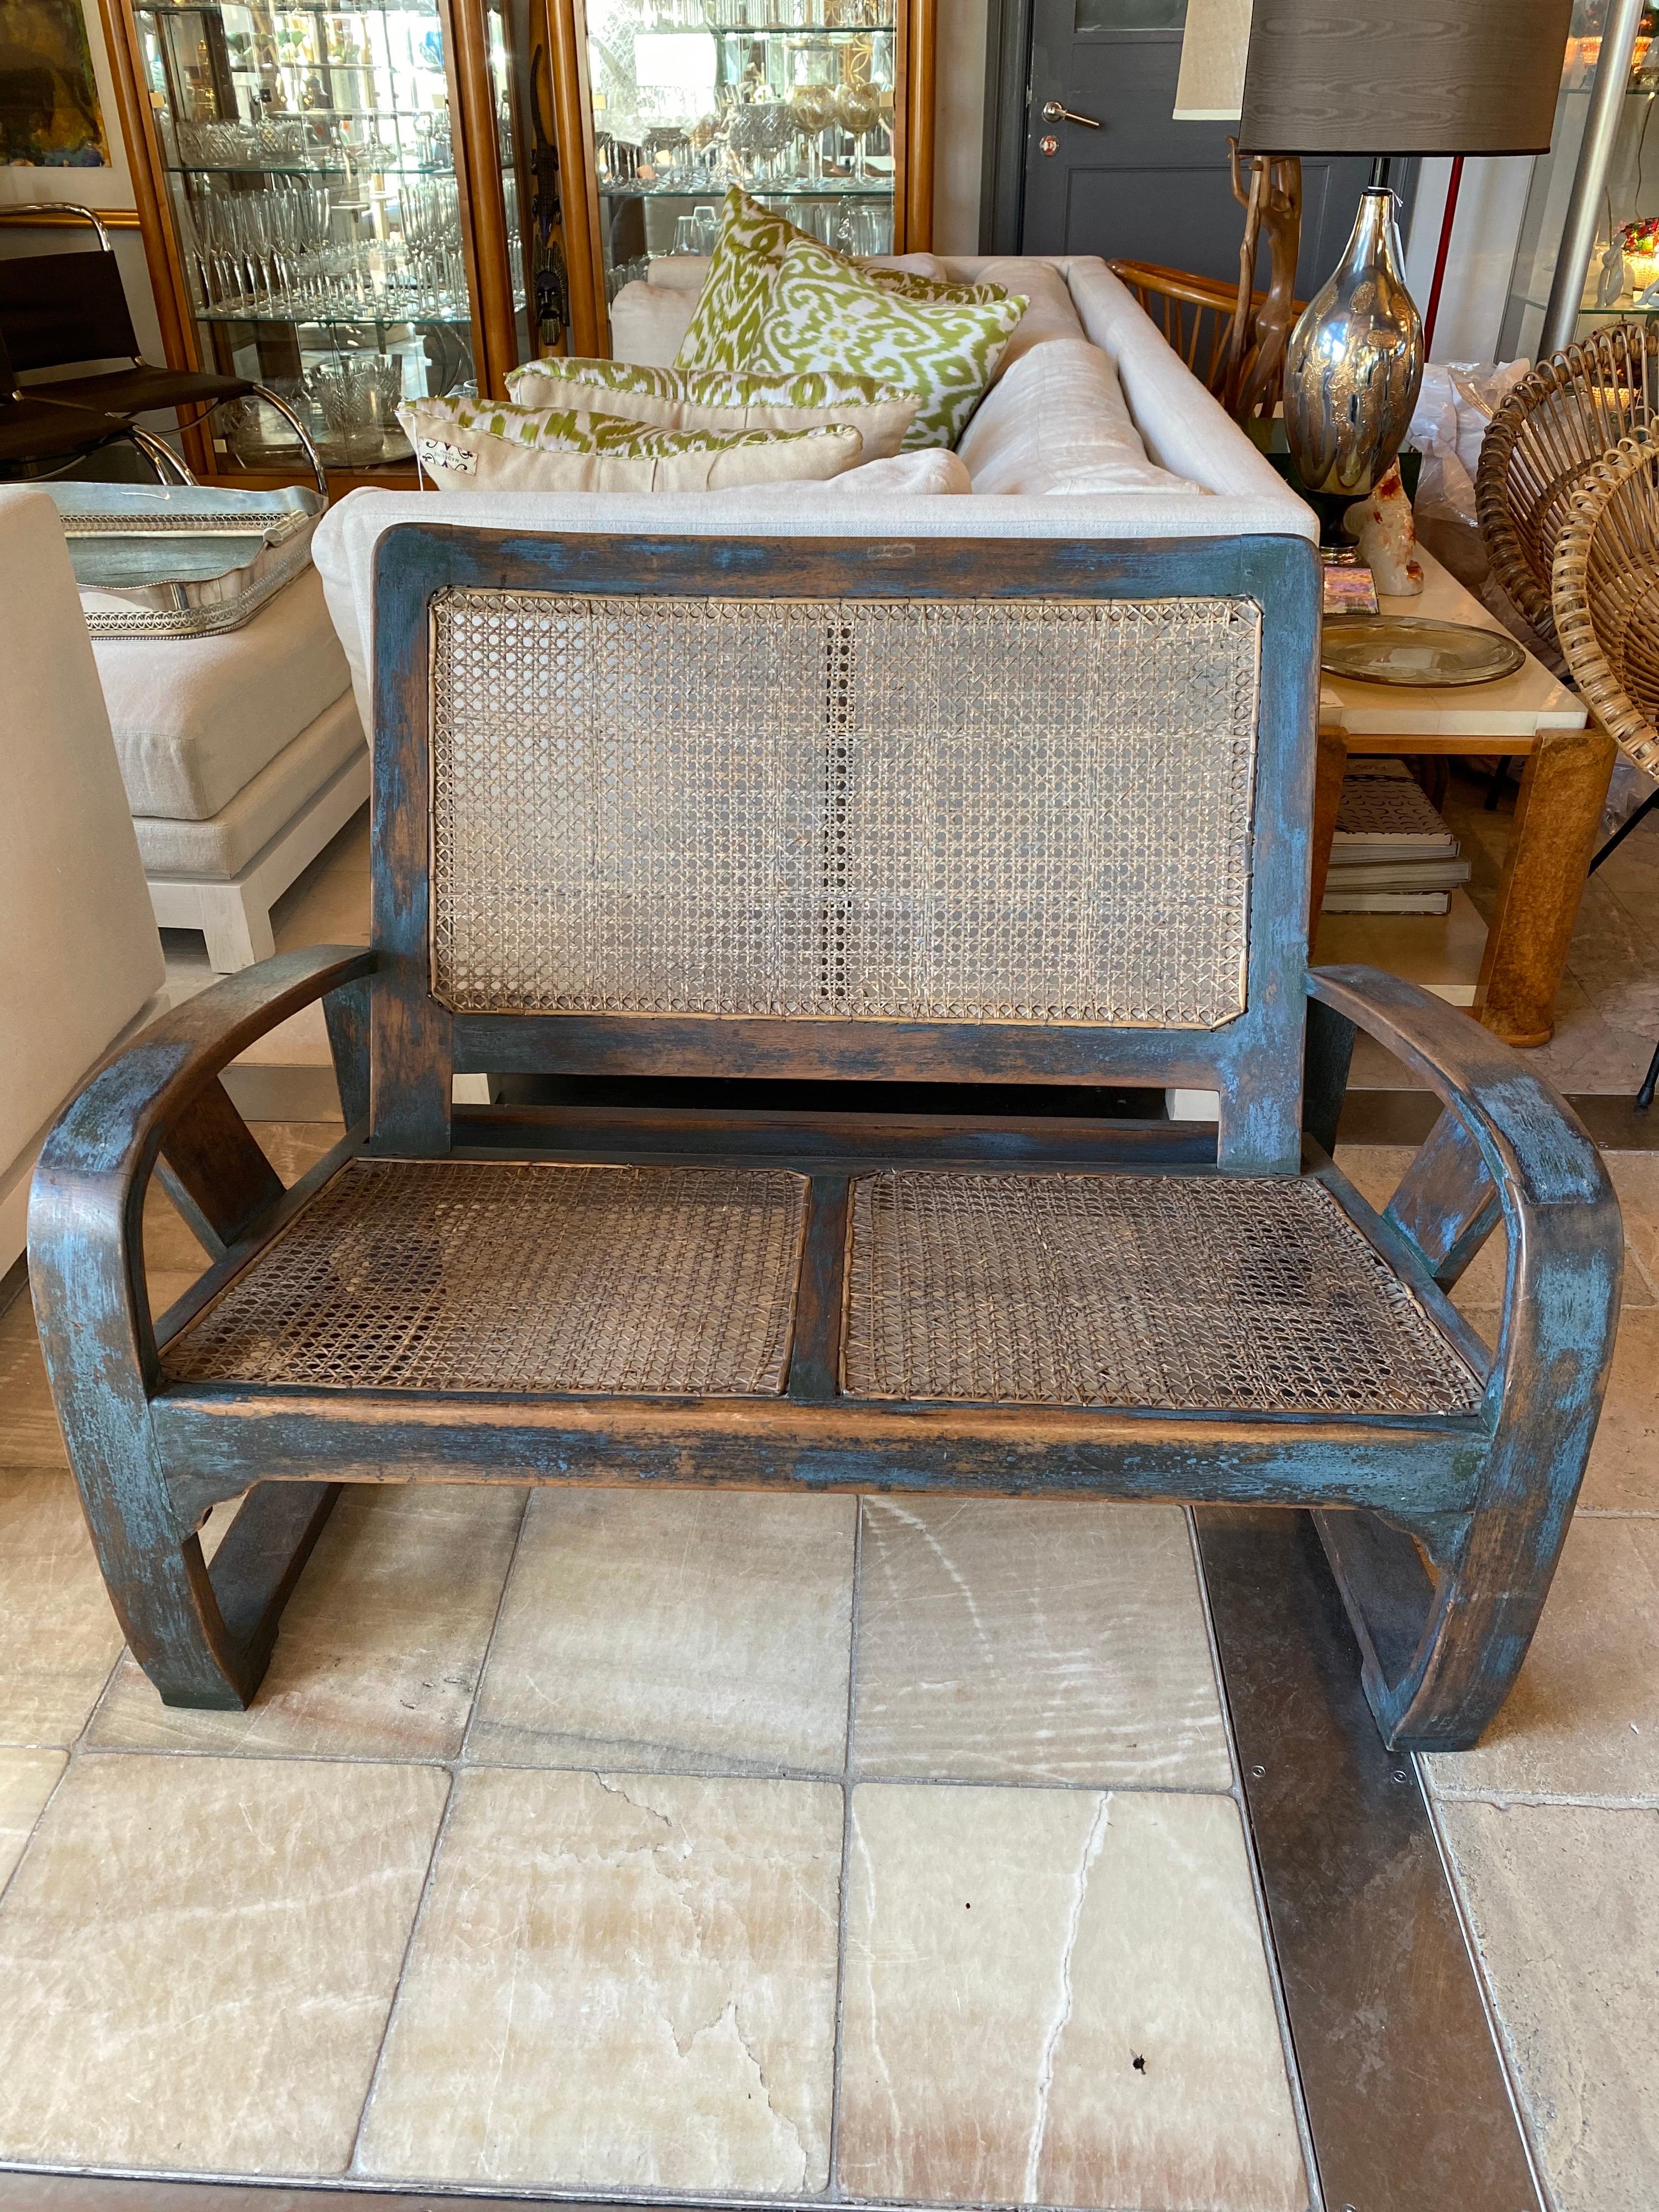 Turn of the century Indonesian Dutch colonial rubbed lacquer sette with caned seat.

Measures: 40